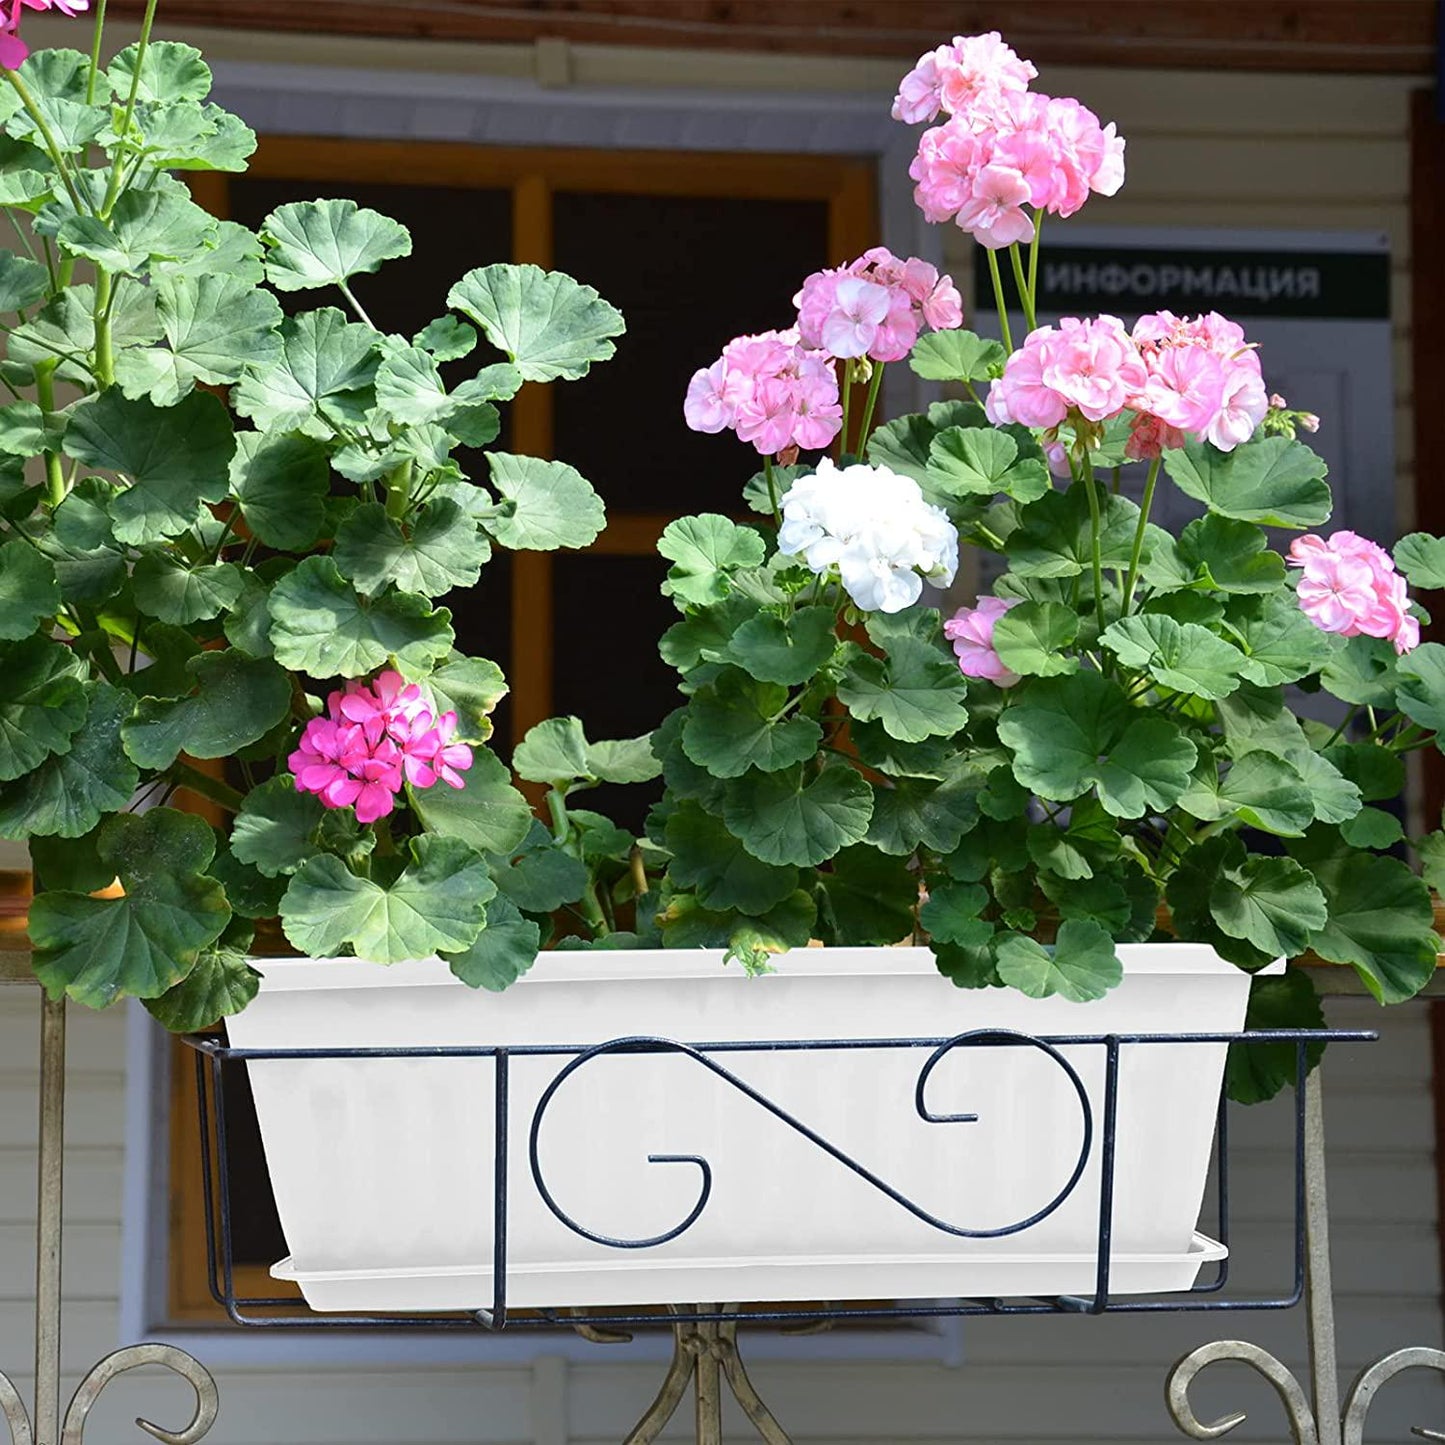 ELCOHO 3 Pack Flower Window Box Planters 17 Inches Plastic Vegetable Plant Pot Rectangular Planters with Trays for Windowsill, Patio, Porch, Garden, Home Decor (White)